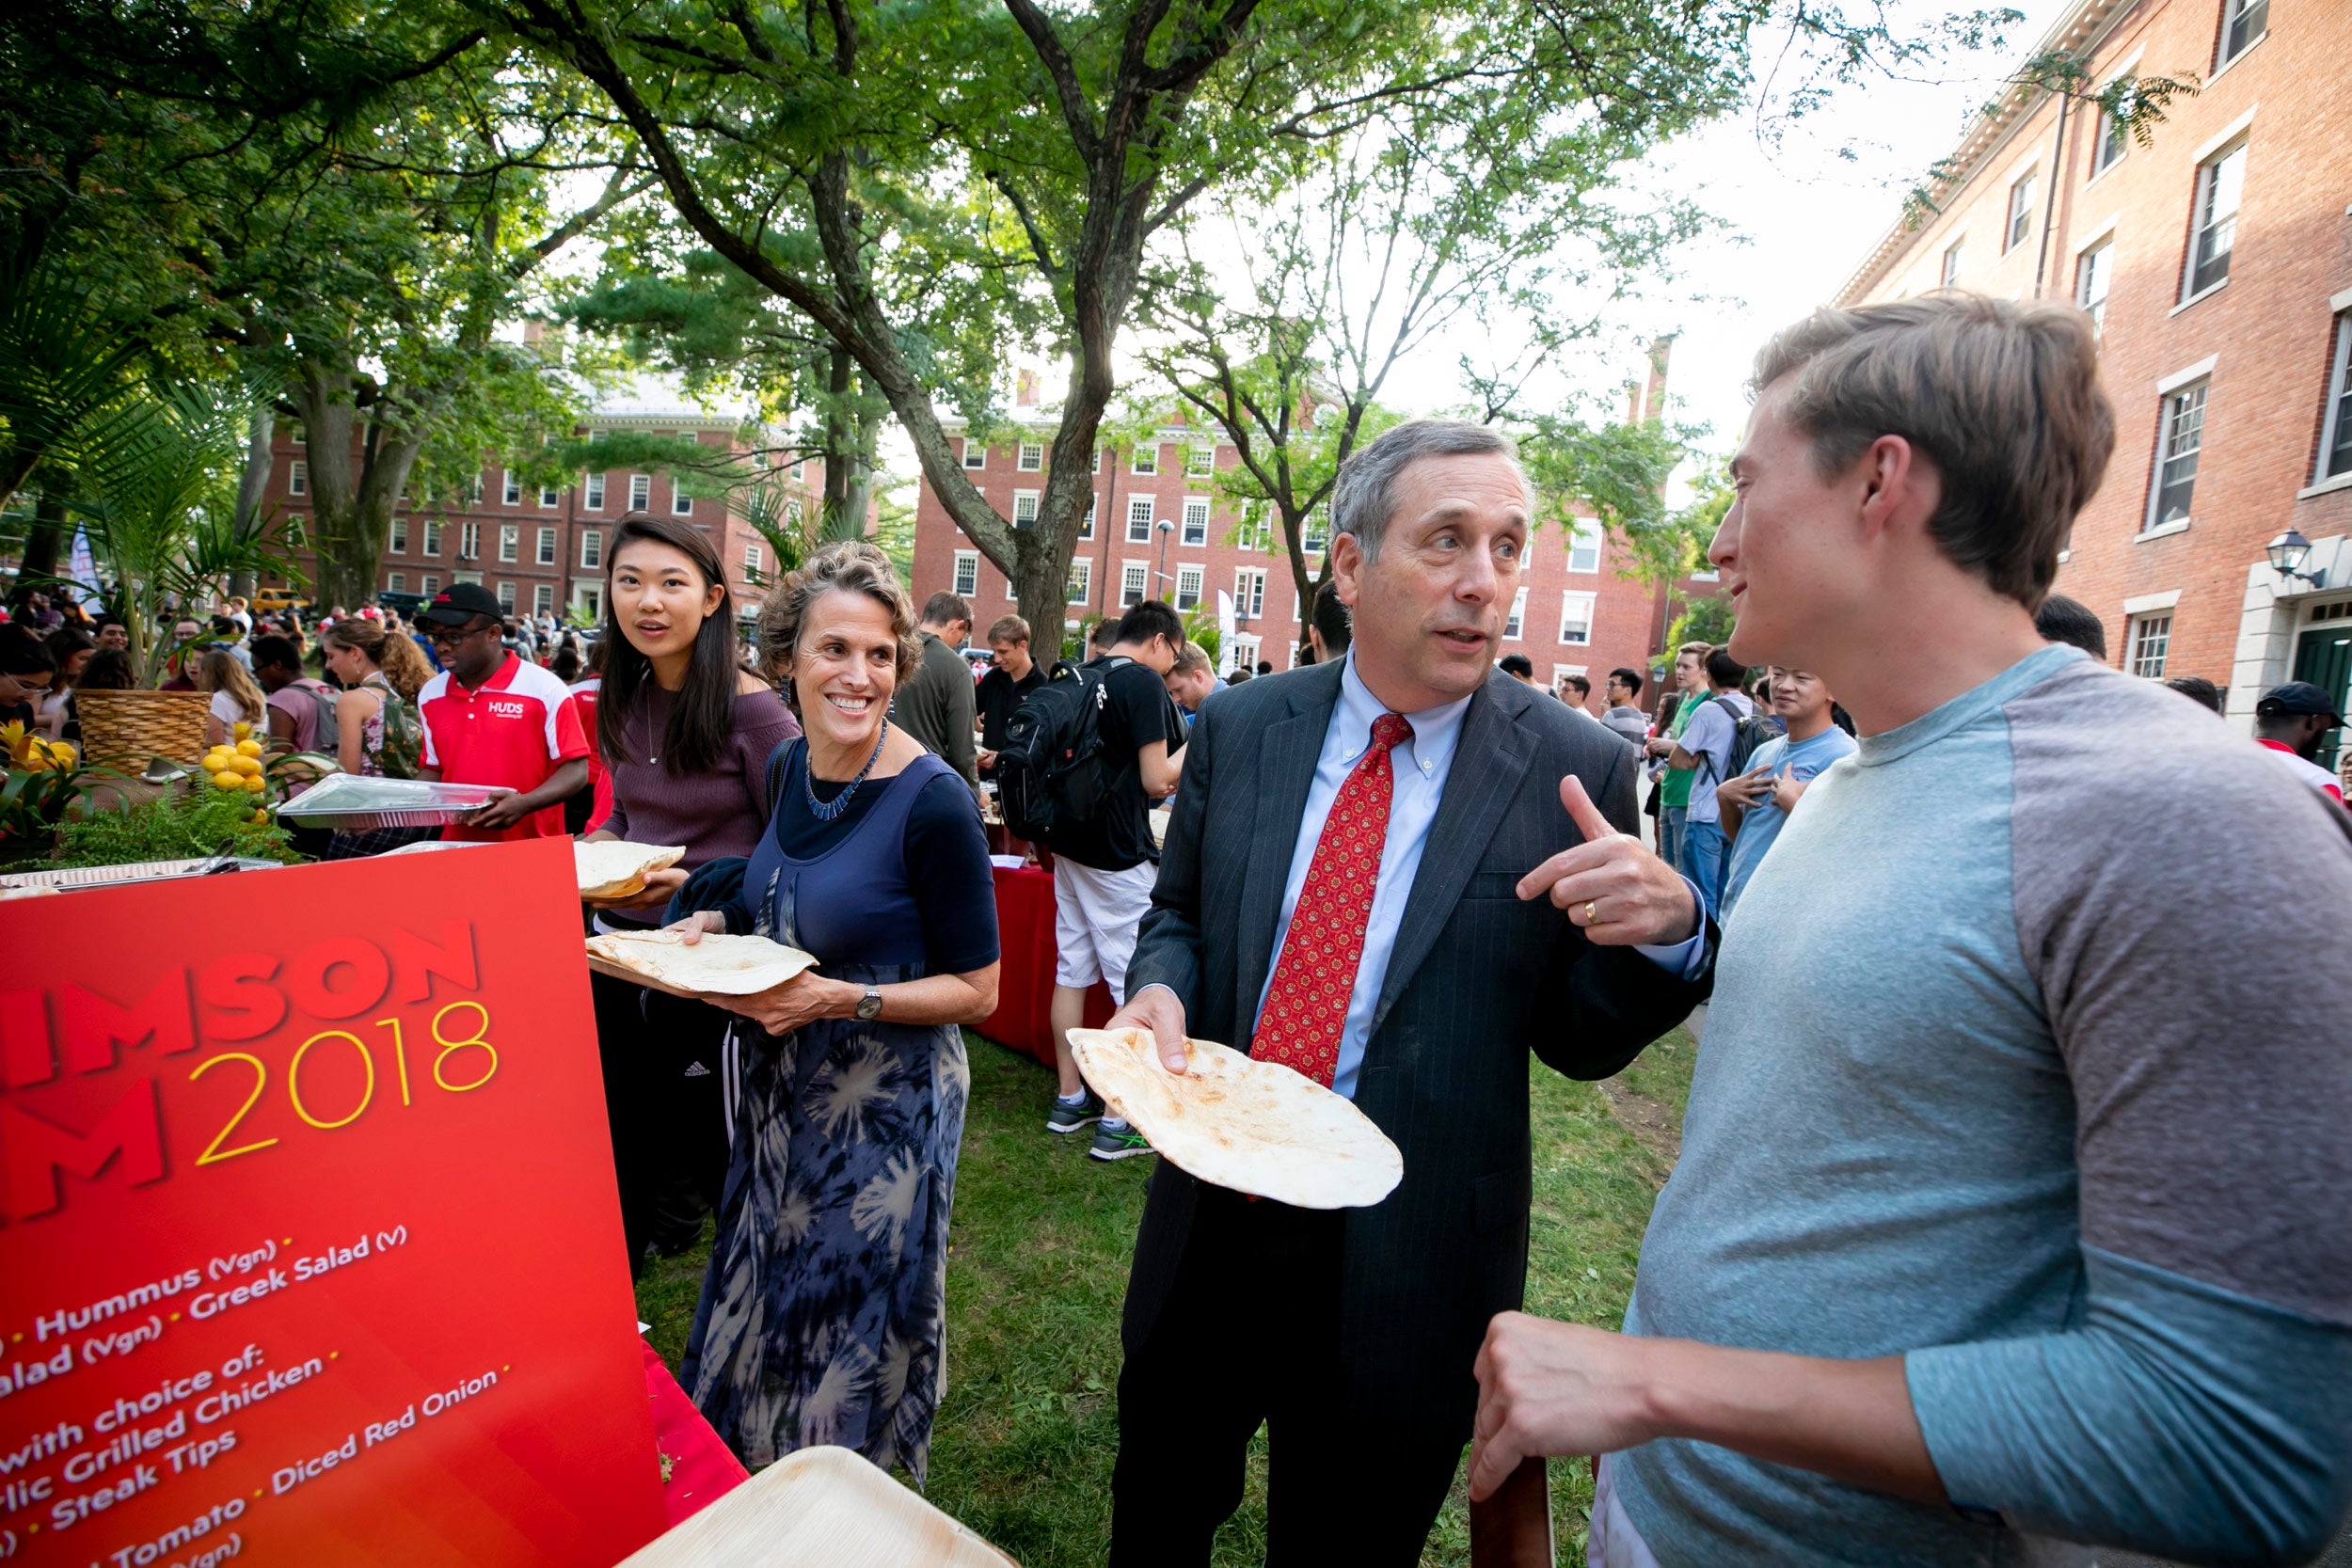 With his wife, Adele, Bacow mingled with students Trey Sexton (right) and Annie Miall during Crimson Jam, a concert in Harvard Yard.